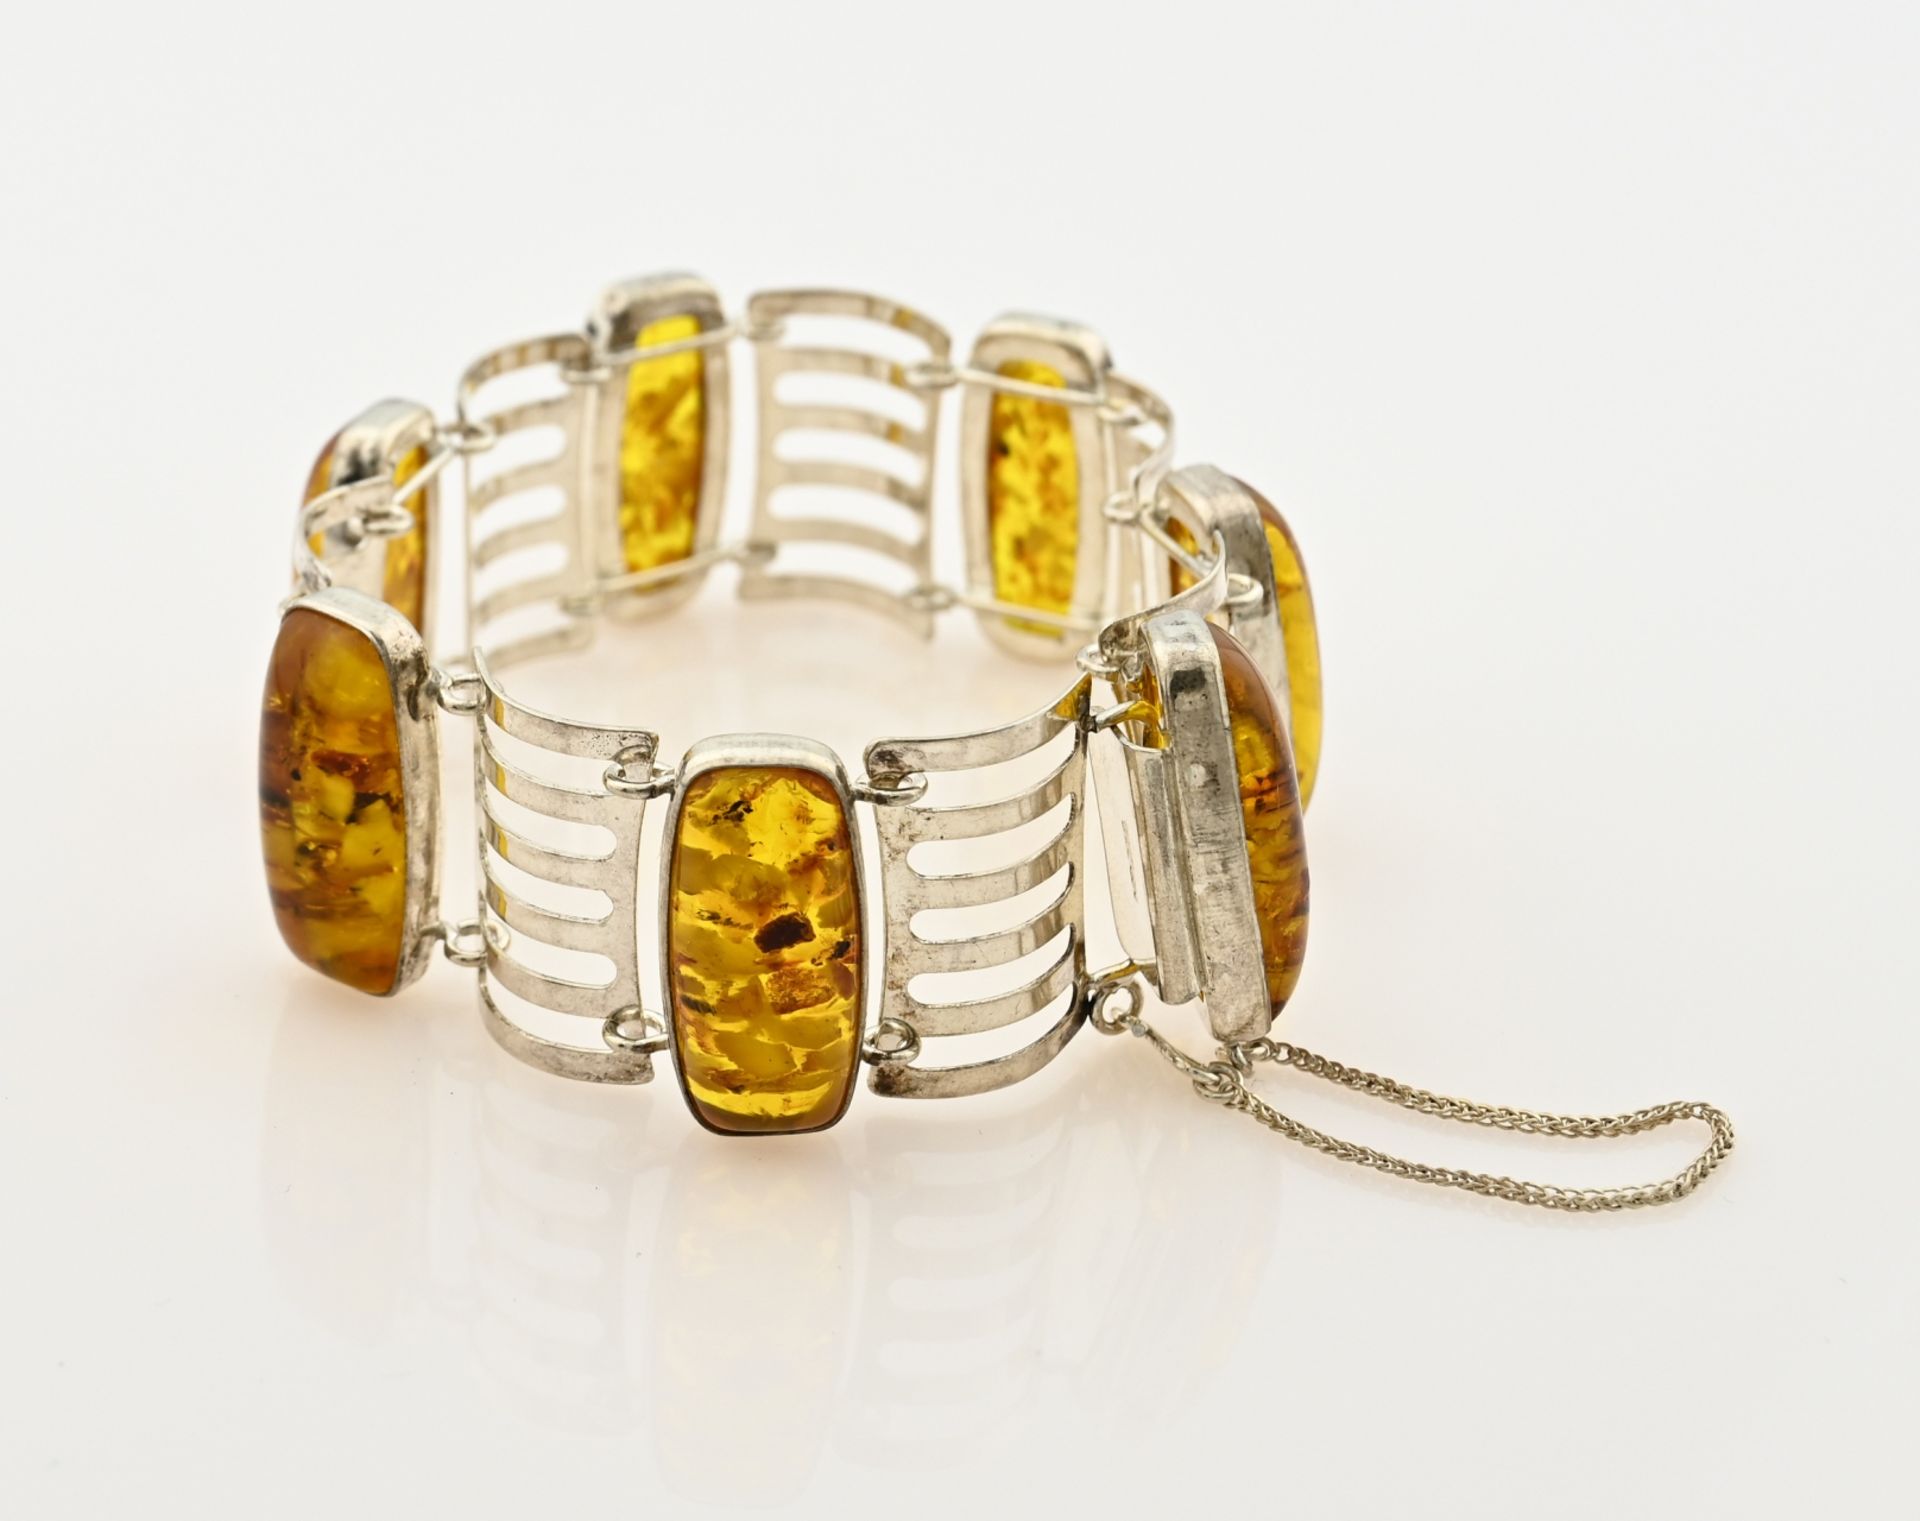 Silver bracelet with amber